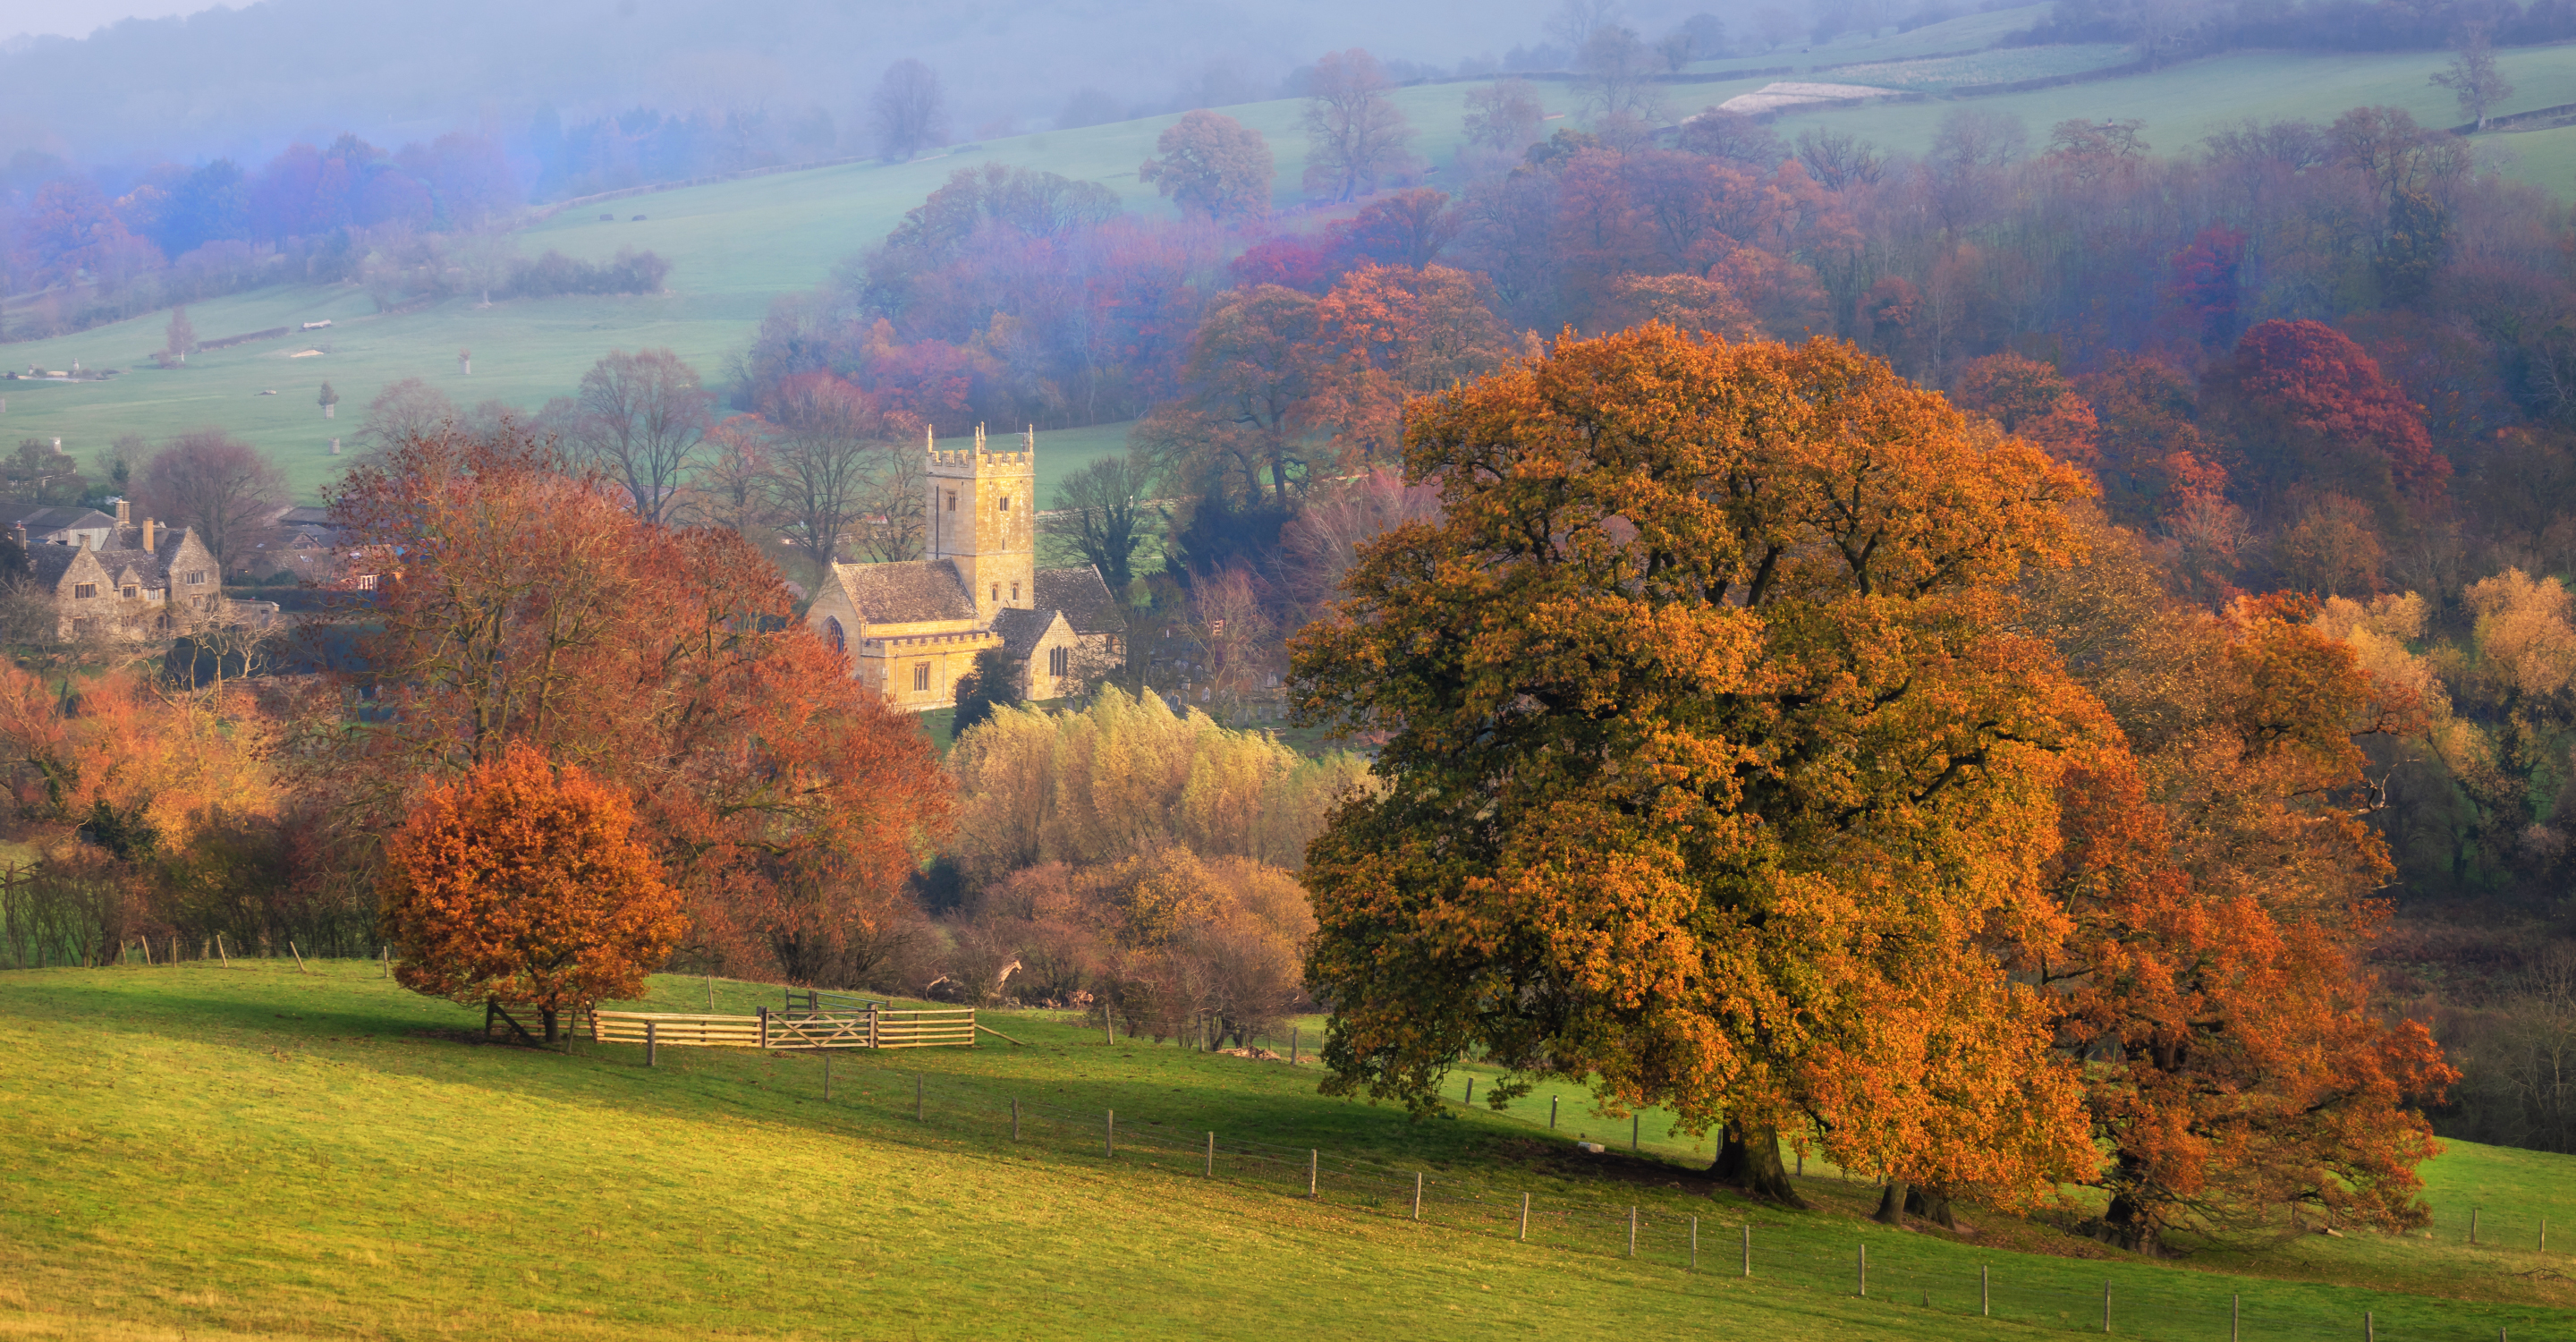 St. Eadburgha's Church in the Cotswolds, England